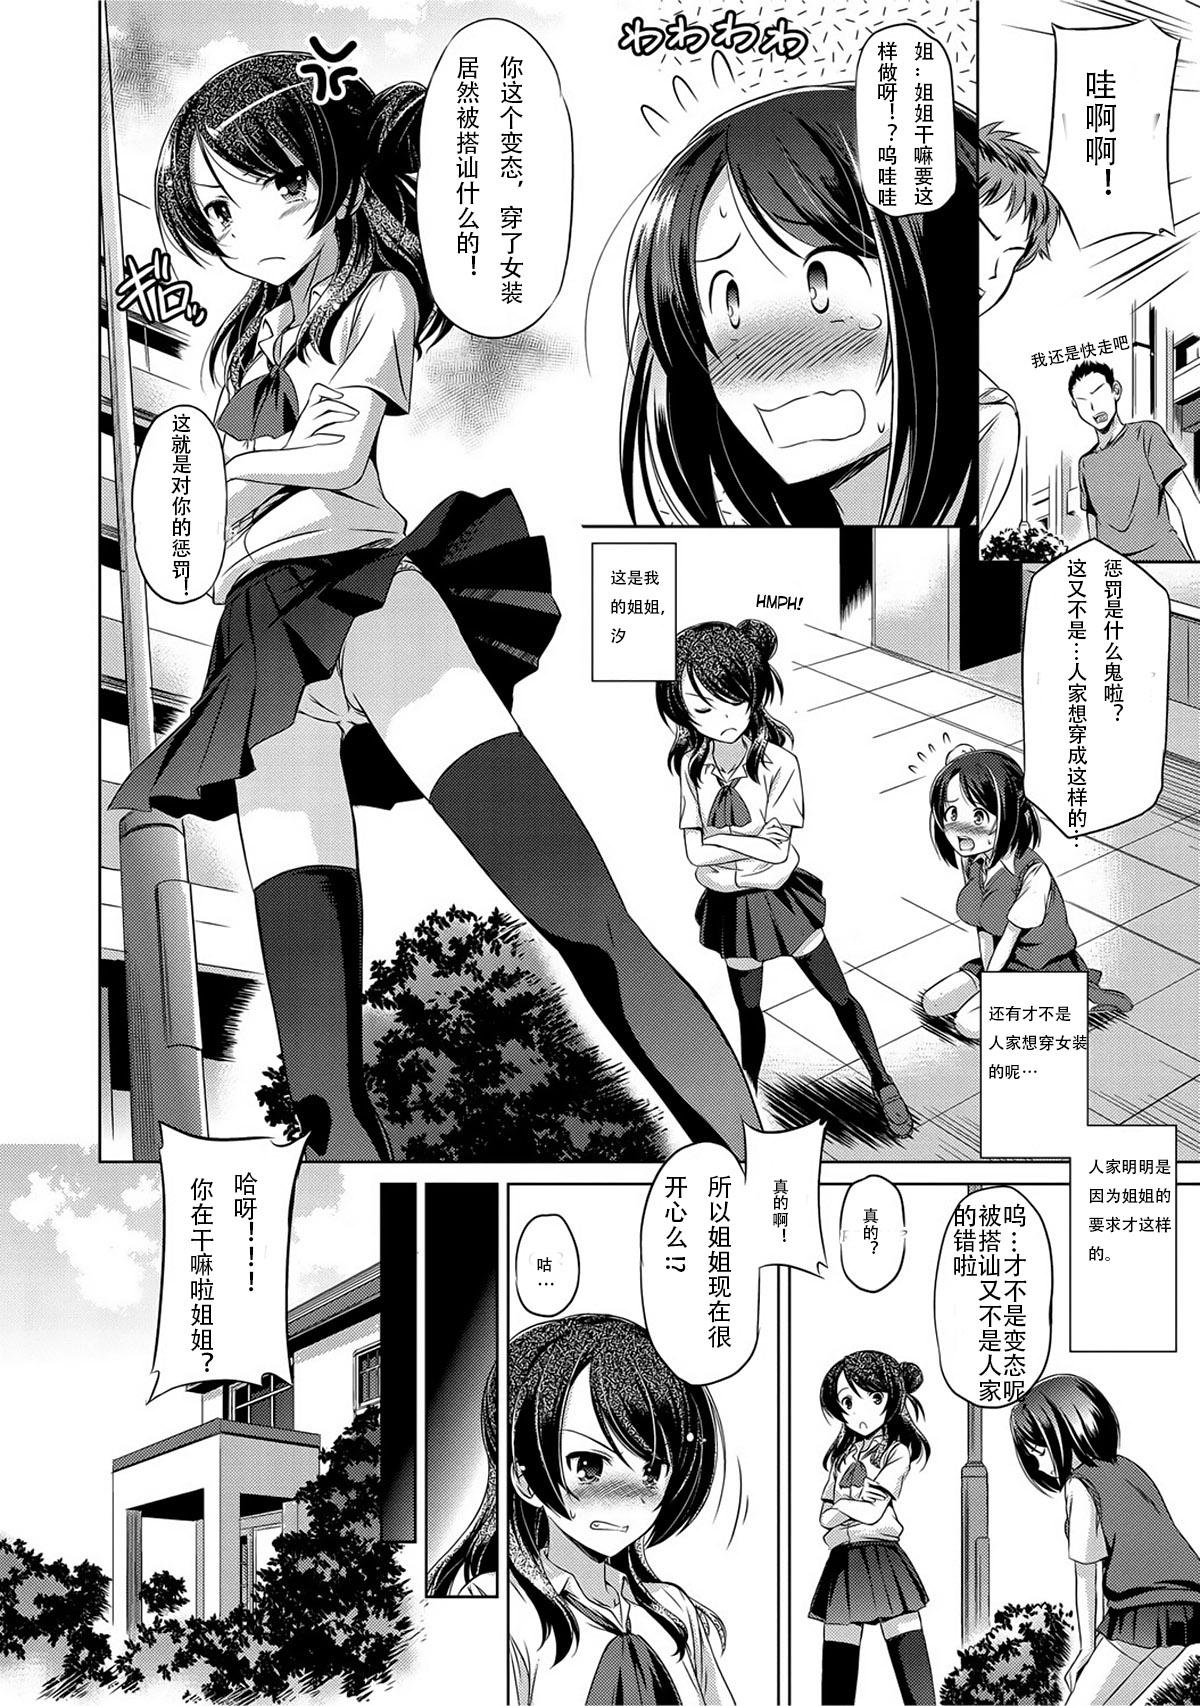 Home Minna no Hoshii Mono | The Thing that Everyone Wants Celebrity Sex - Page 2